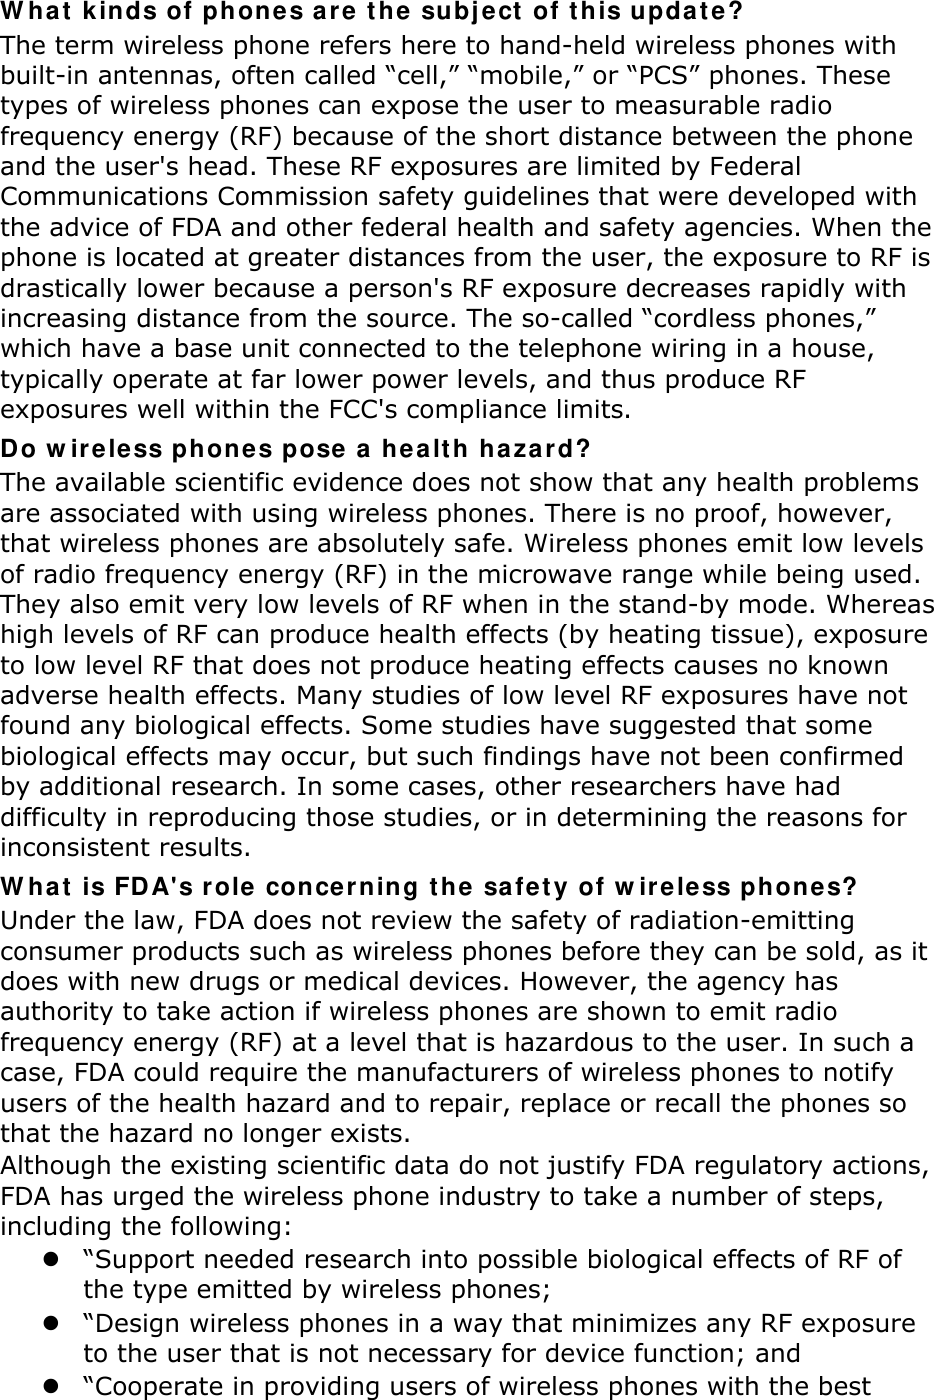 W hat k in ds of phones ar e t he subj ect  of t his upda t e? The term wireless phone refers here to hand-held wireless phones with built-in antennas, often called “cell,” “mobile,” or “PCS” phones. These types of wireless phones can expose the user to measurable radio frequency energy (RF) because of the short distance between the phone and the user&apos;s head. These RF exposures are limited by Federal Communications Commission safety guidelines that were developed with the advice of FDA and other federal health and safety agencies. When the phone is located at greater distances from the user, the exposure to RF is drastically lower because a person&apos;s RF exposure decreases rapidly with increasing distance from the source. The so-called “cordless phones,” which have a base unit connected to the telephone wiring in a house, typically operate at far lower power levels, and thus produce RF exposures well within the FCC&apos;s compliance limits. Do w ir eless phones pose a he alt h ha za rd? The available scientific evidence does not show that any health problems are associated with using wireless phones. There is no proof, however, that wireless phones are absolutely safe. Wireless phones emit low levels of radio frequency energy (RF) in the microwave range while being used. They also emit very low levels of RF when in the stand-by mode. Whereas high levels of RF can produce health effects (by heating tissue), exposure to low level RF that does not produce heating effects causes no known adverse health effects. Many studies of low level RF exposures have not found any biological effects. Some studies have suggested that some biological effects may occur, but such findings have not been confirmed by additional research. In some cases, other researchers have had difficulty in reproducing those studies, or in determining the reasons for inconsistent results. W hat is FD A&apos;s r ole concer ning t he safe ty of w ire le ss phones? Under the law, FDA does not review the safety of radiation-emitting consumer products such as wireless phones before they can be sold, as it does with new drugs or medical devices. However, the agency has authority to take action if wireless phones are shown to emit radio frequency energy (RF) at a level that is hazardous to the user. In such a case, FDA could require the manufacturers of wireless phones to notify users of the health hazard and to repair, replace or recall the phones so that the hazard no longer exists. Although the existing scientific data do not justify FDA regulatory actions, FDA has urged the wireless phone industry to take a number of steps, including the following:  “Support needed research into possible biological effects of RF of the type emitted by wireless phones;  “Design wireless phones in a way that minimizes any RF exposure to the user that is not necessary for device function; and  “Cooperate in providing users of wireless phones with the best 